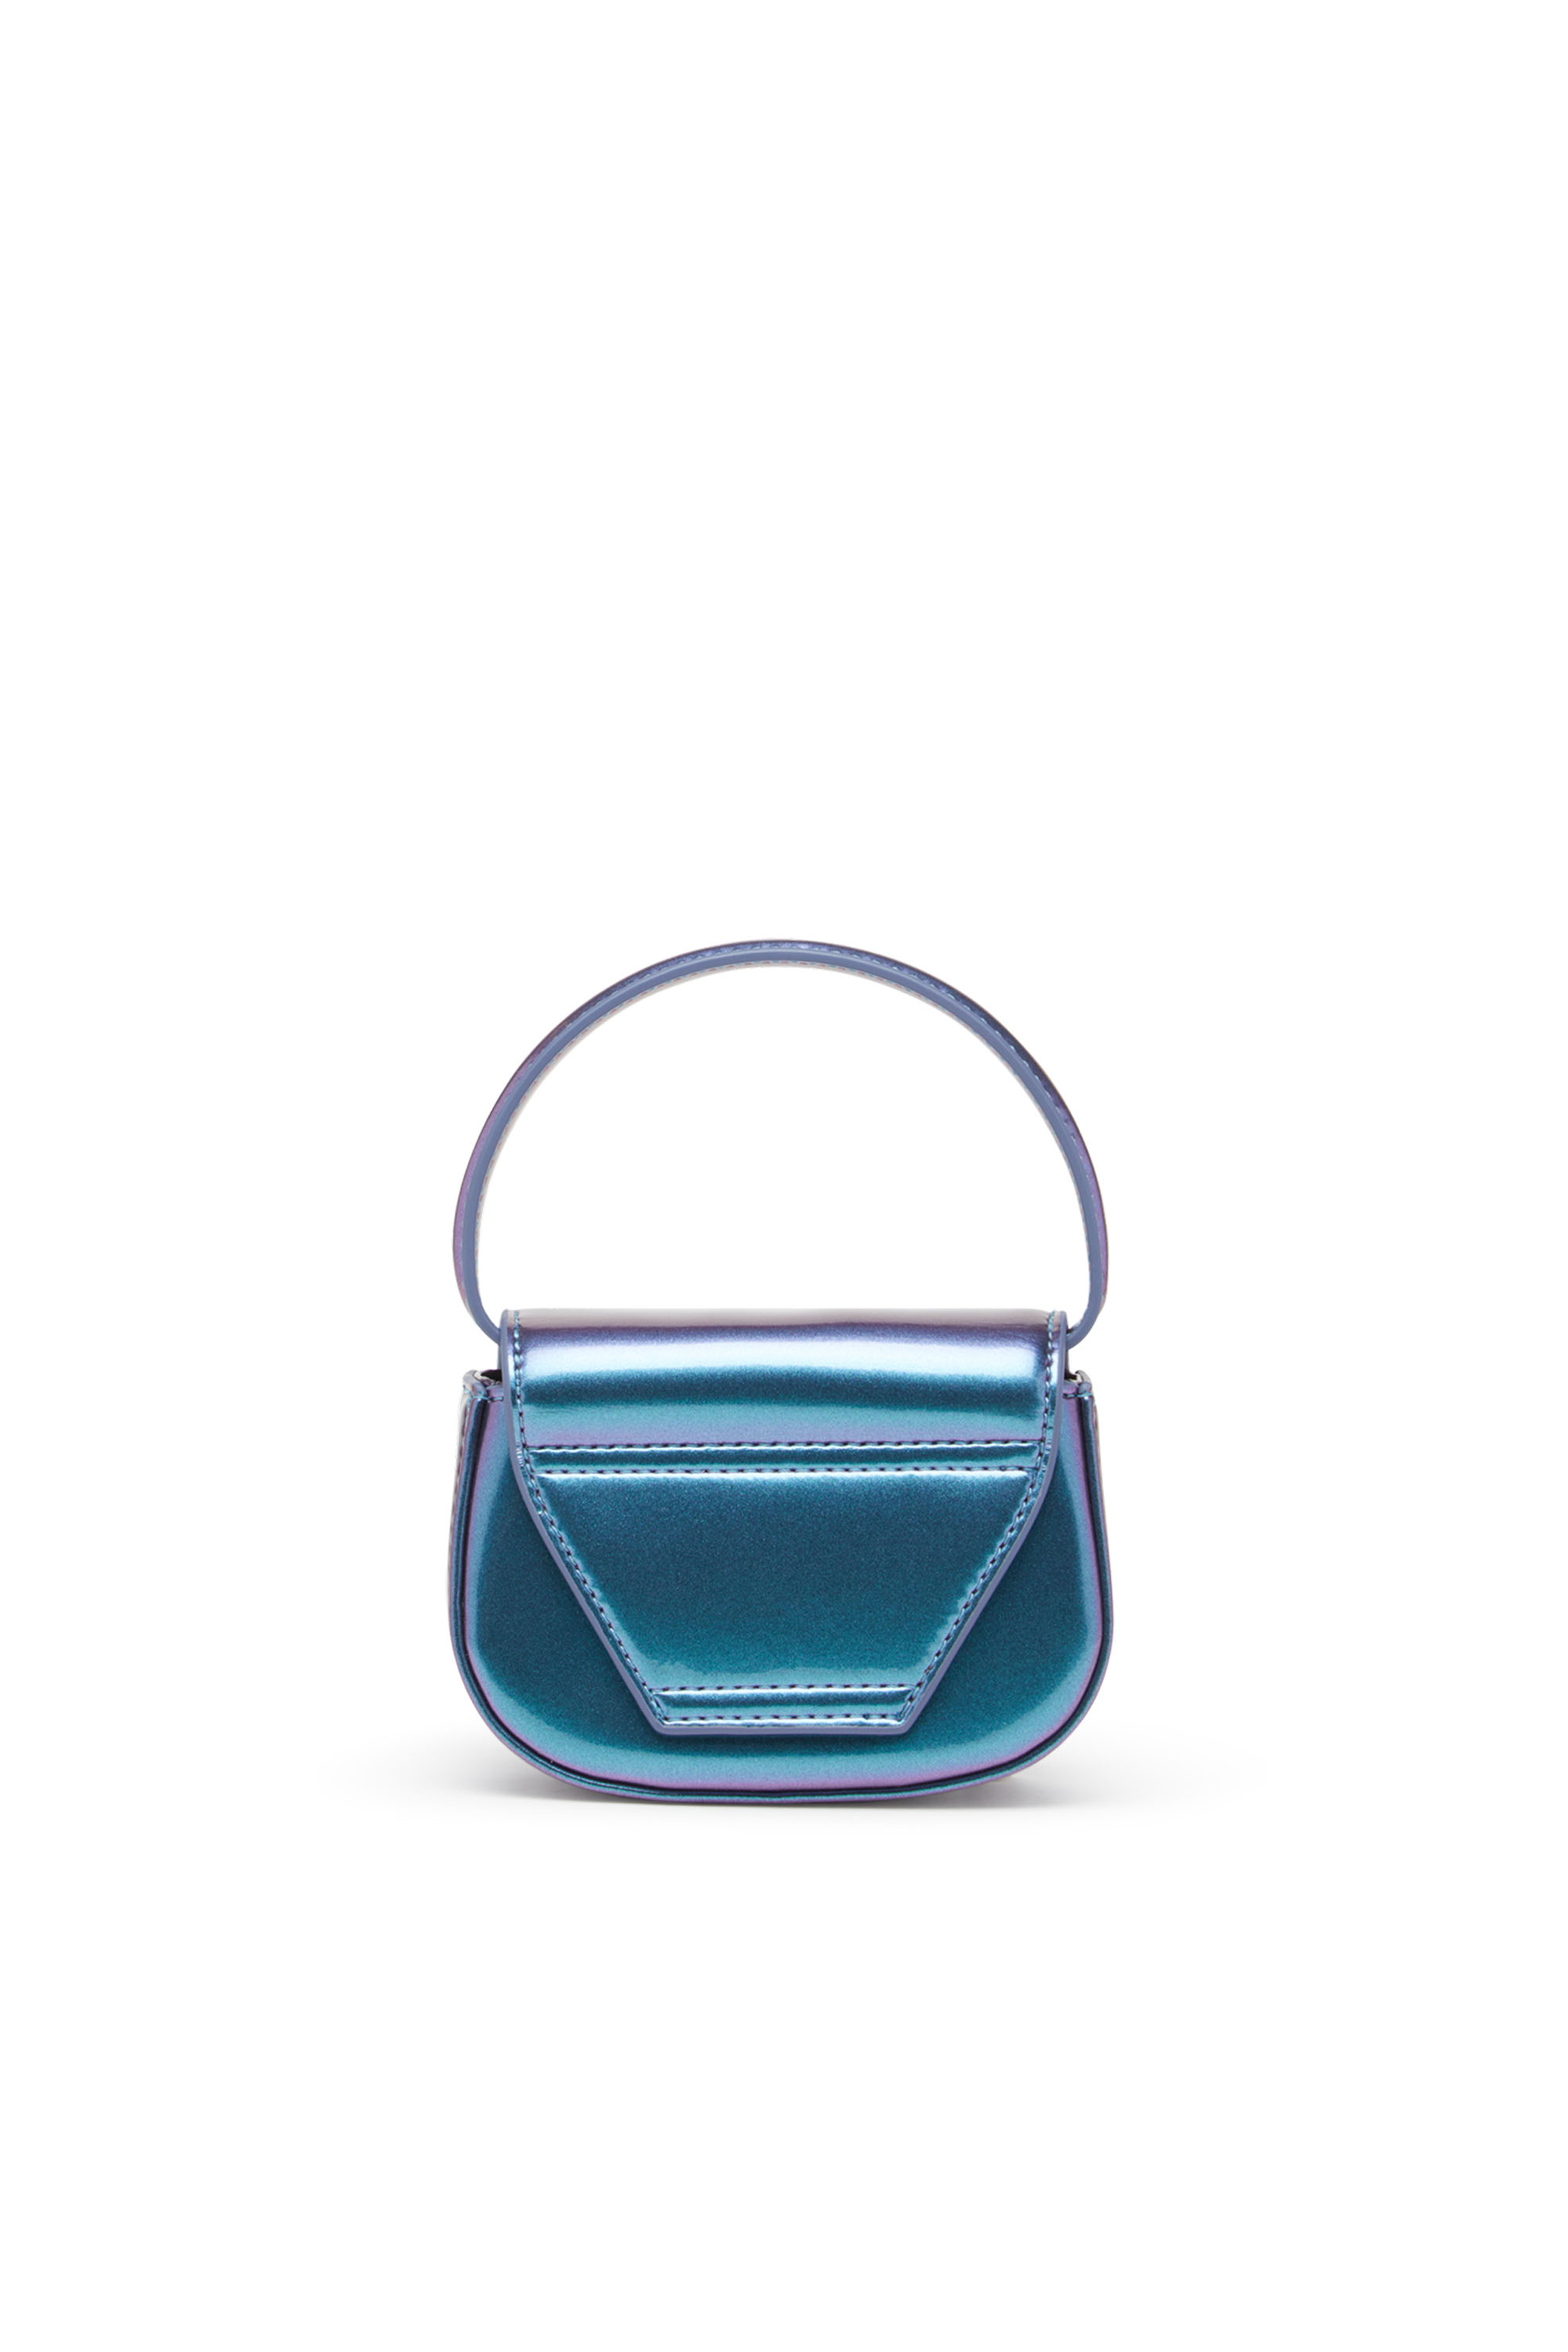 Diesel - 1DR XS, Woman 1DR XS-Iconic iridescent mini bag in Blue - Image 2